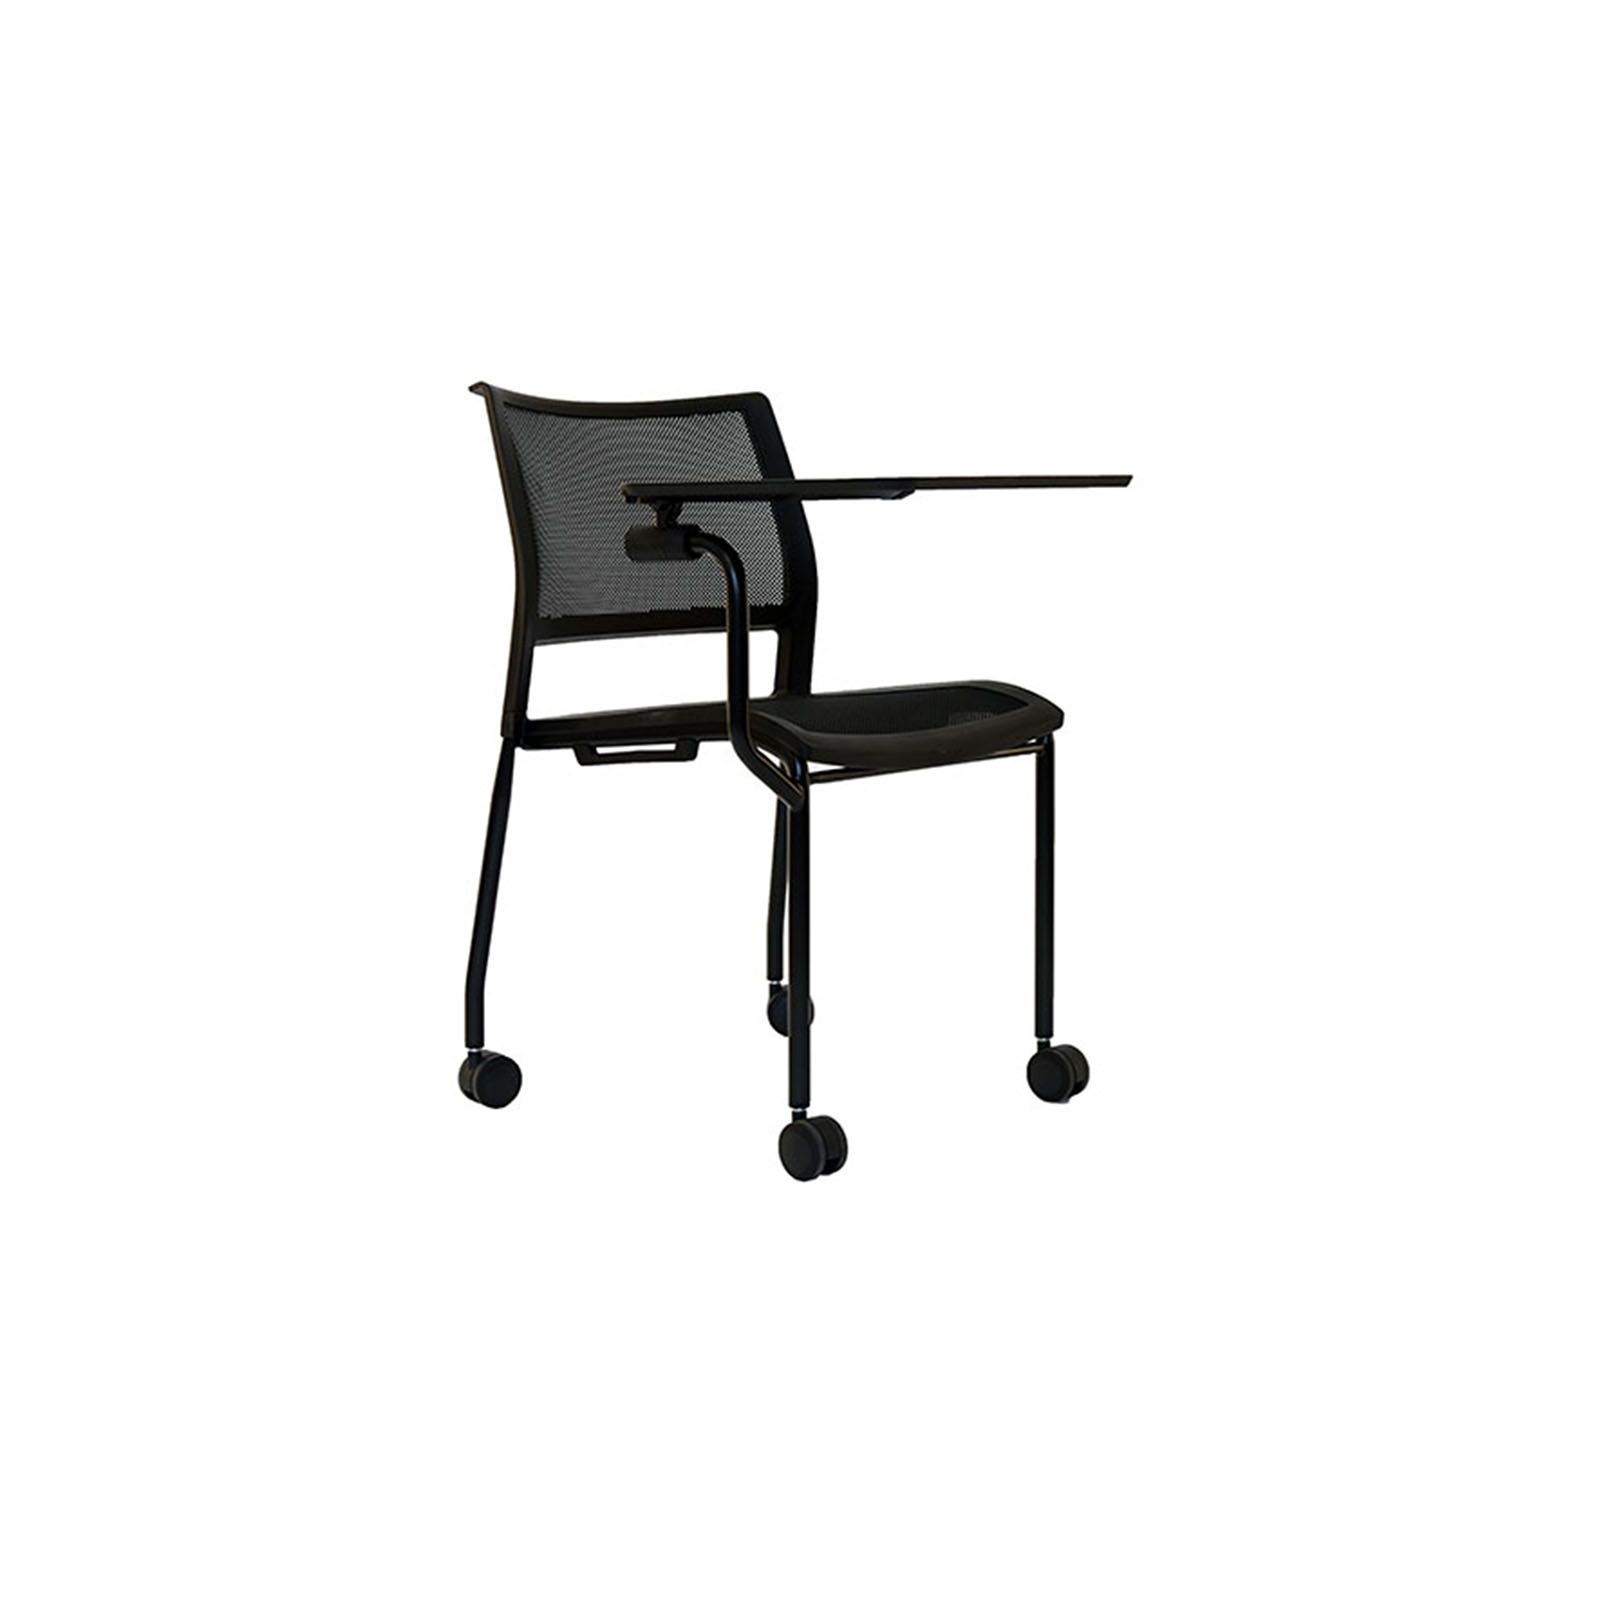 TIPO CHAIR WITH WRITING TABLET